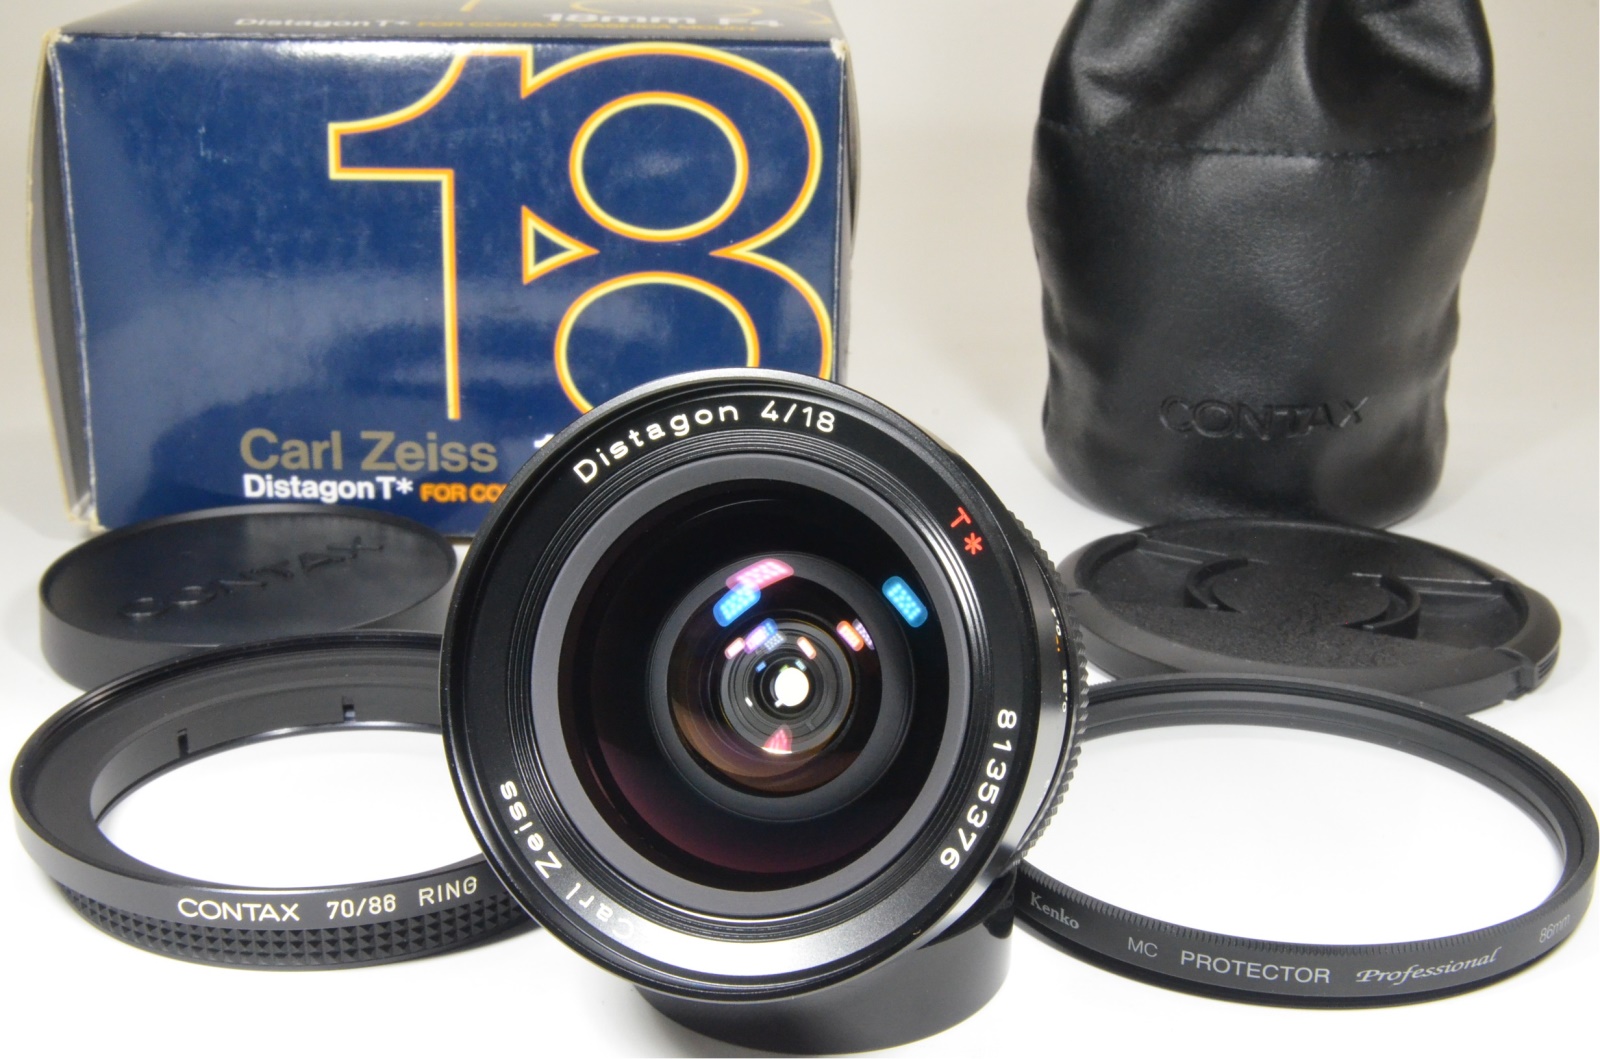 contax carl zeiss distagon t* 18mm f4 mmj japan with 70/86 ring